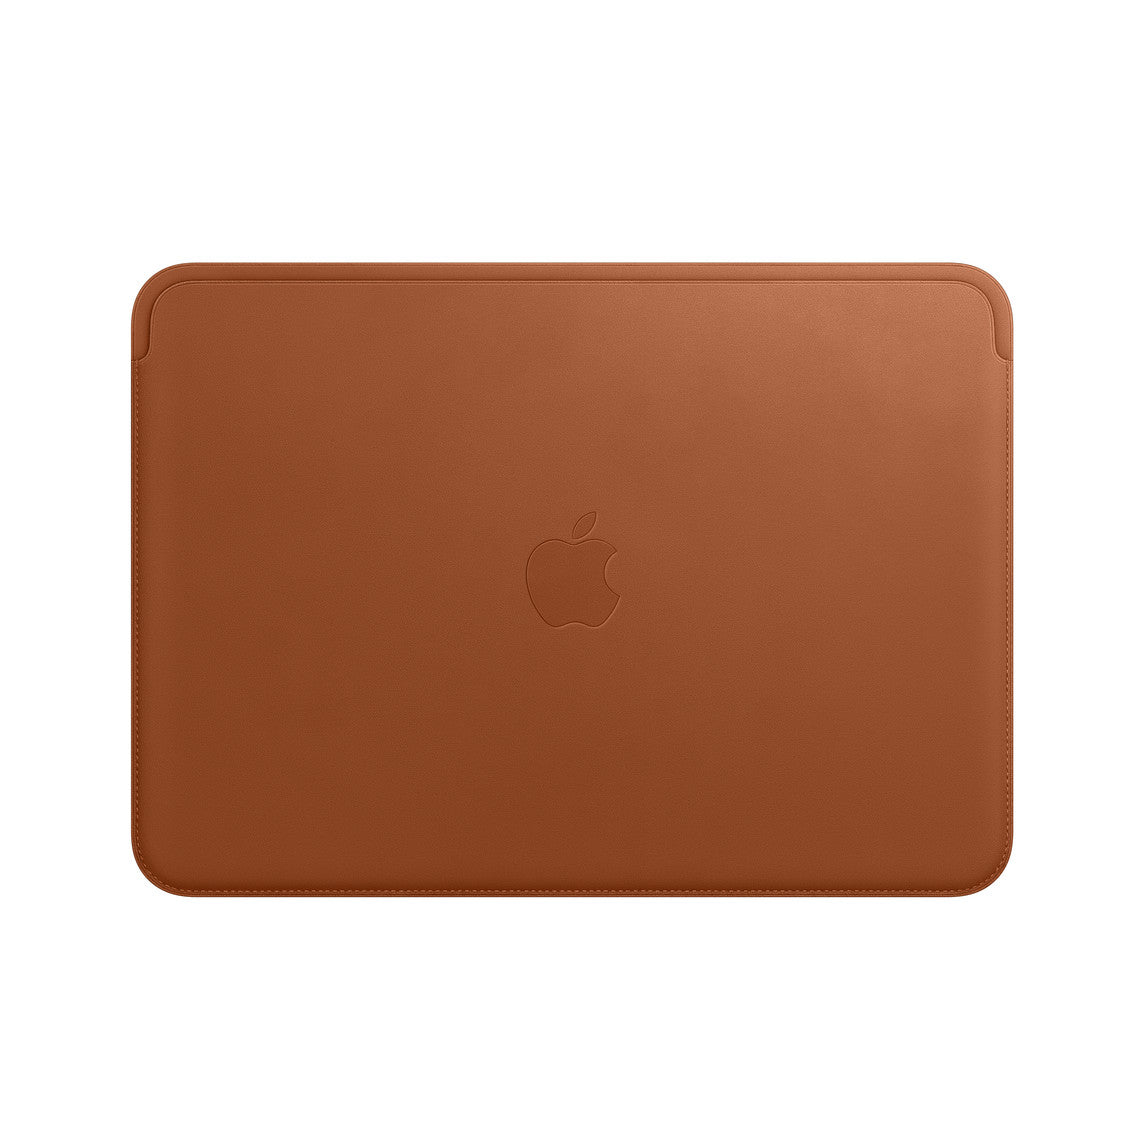 Apple MacBook Pro 16 Leather Sleeve - Saddle Brown Brown New - Sealed